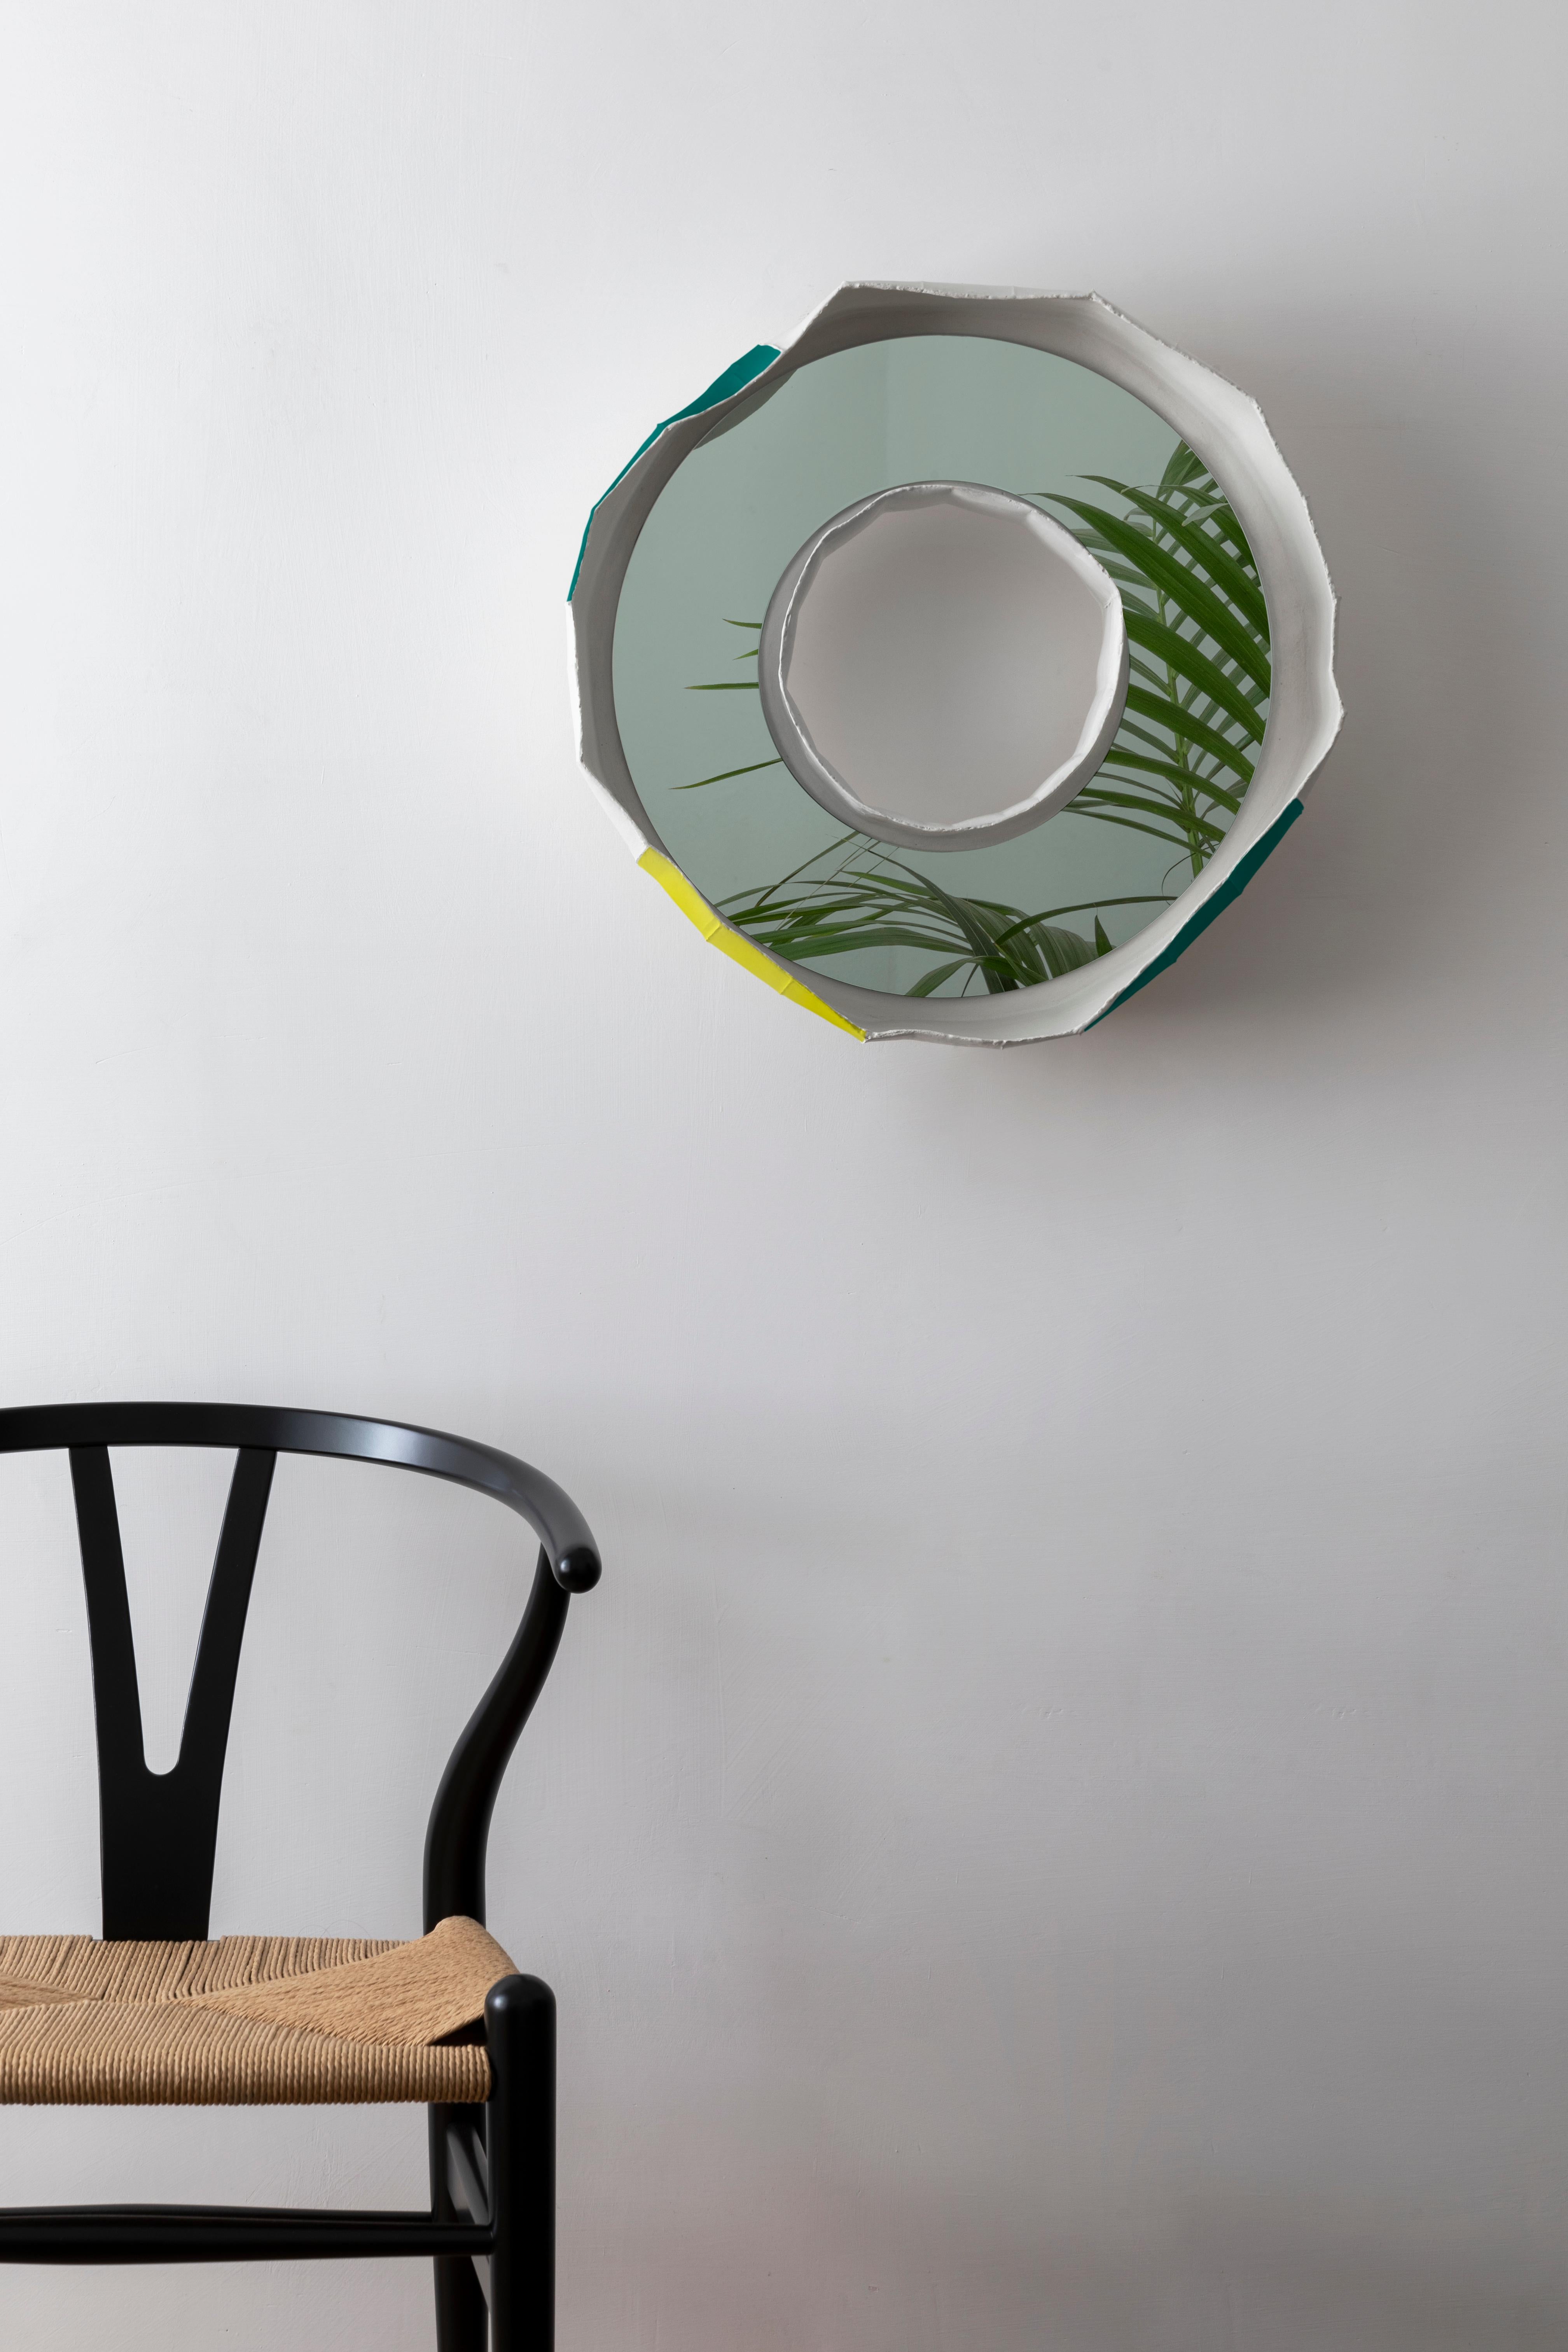 RING NOVA, a stunning ceramic mirror handmade in Italy, one of 2 designs that make up the collection REFLECTIONS, the result of a collaboration between artist Paola Paronetto & designer Giovanni Botticelli, that integrates ceramic with colour and